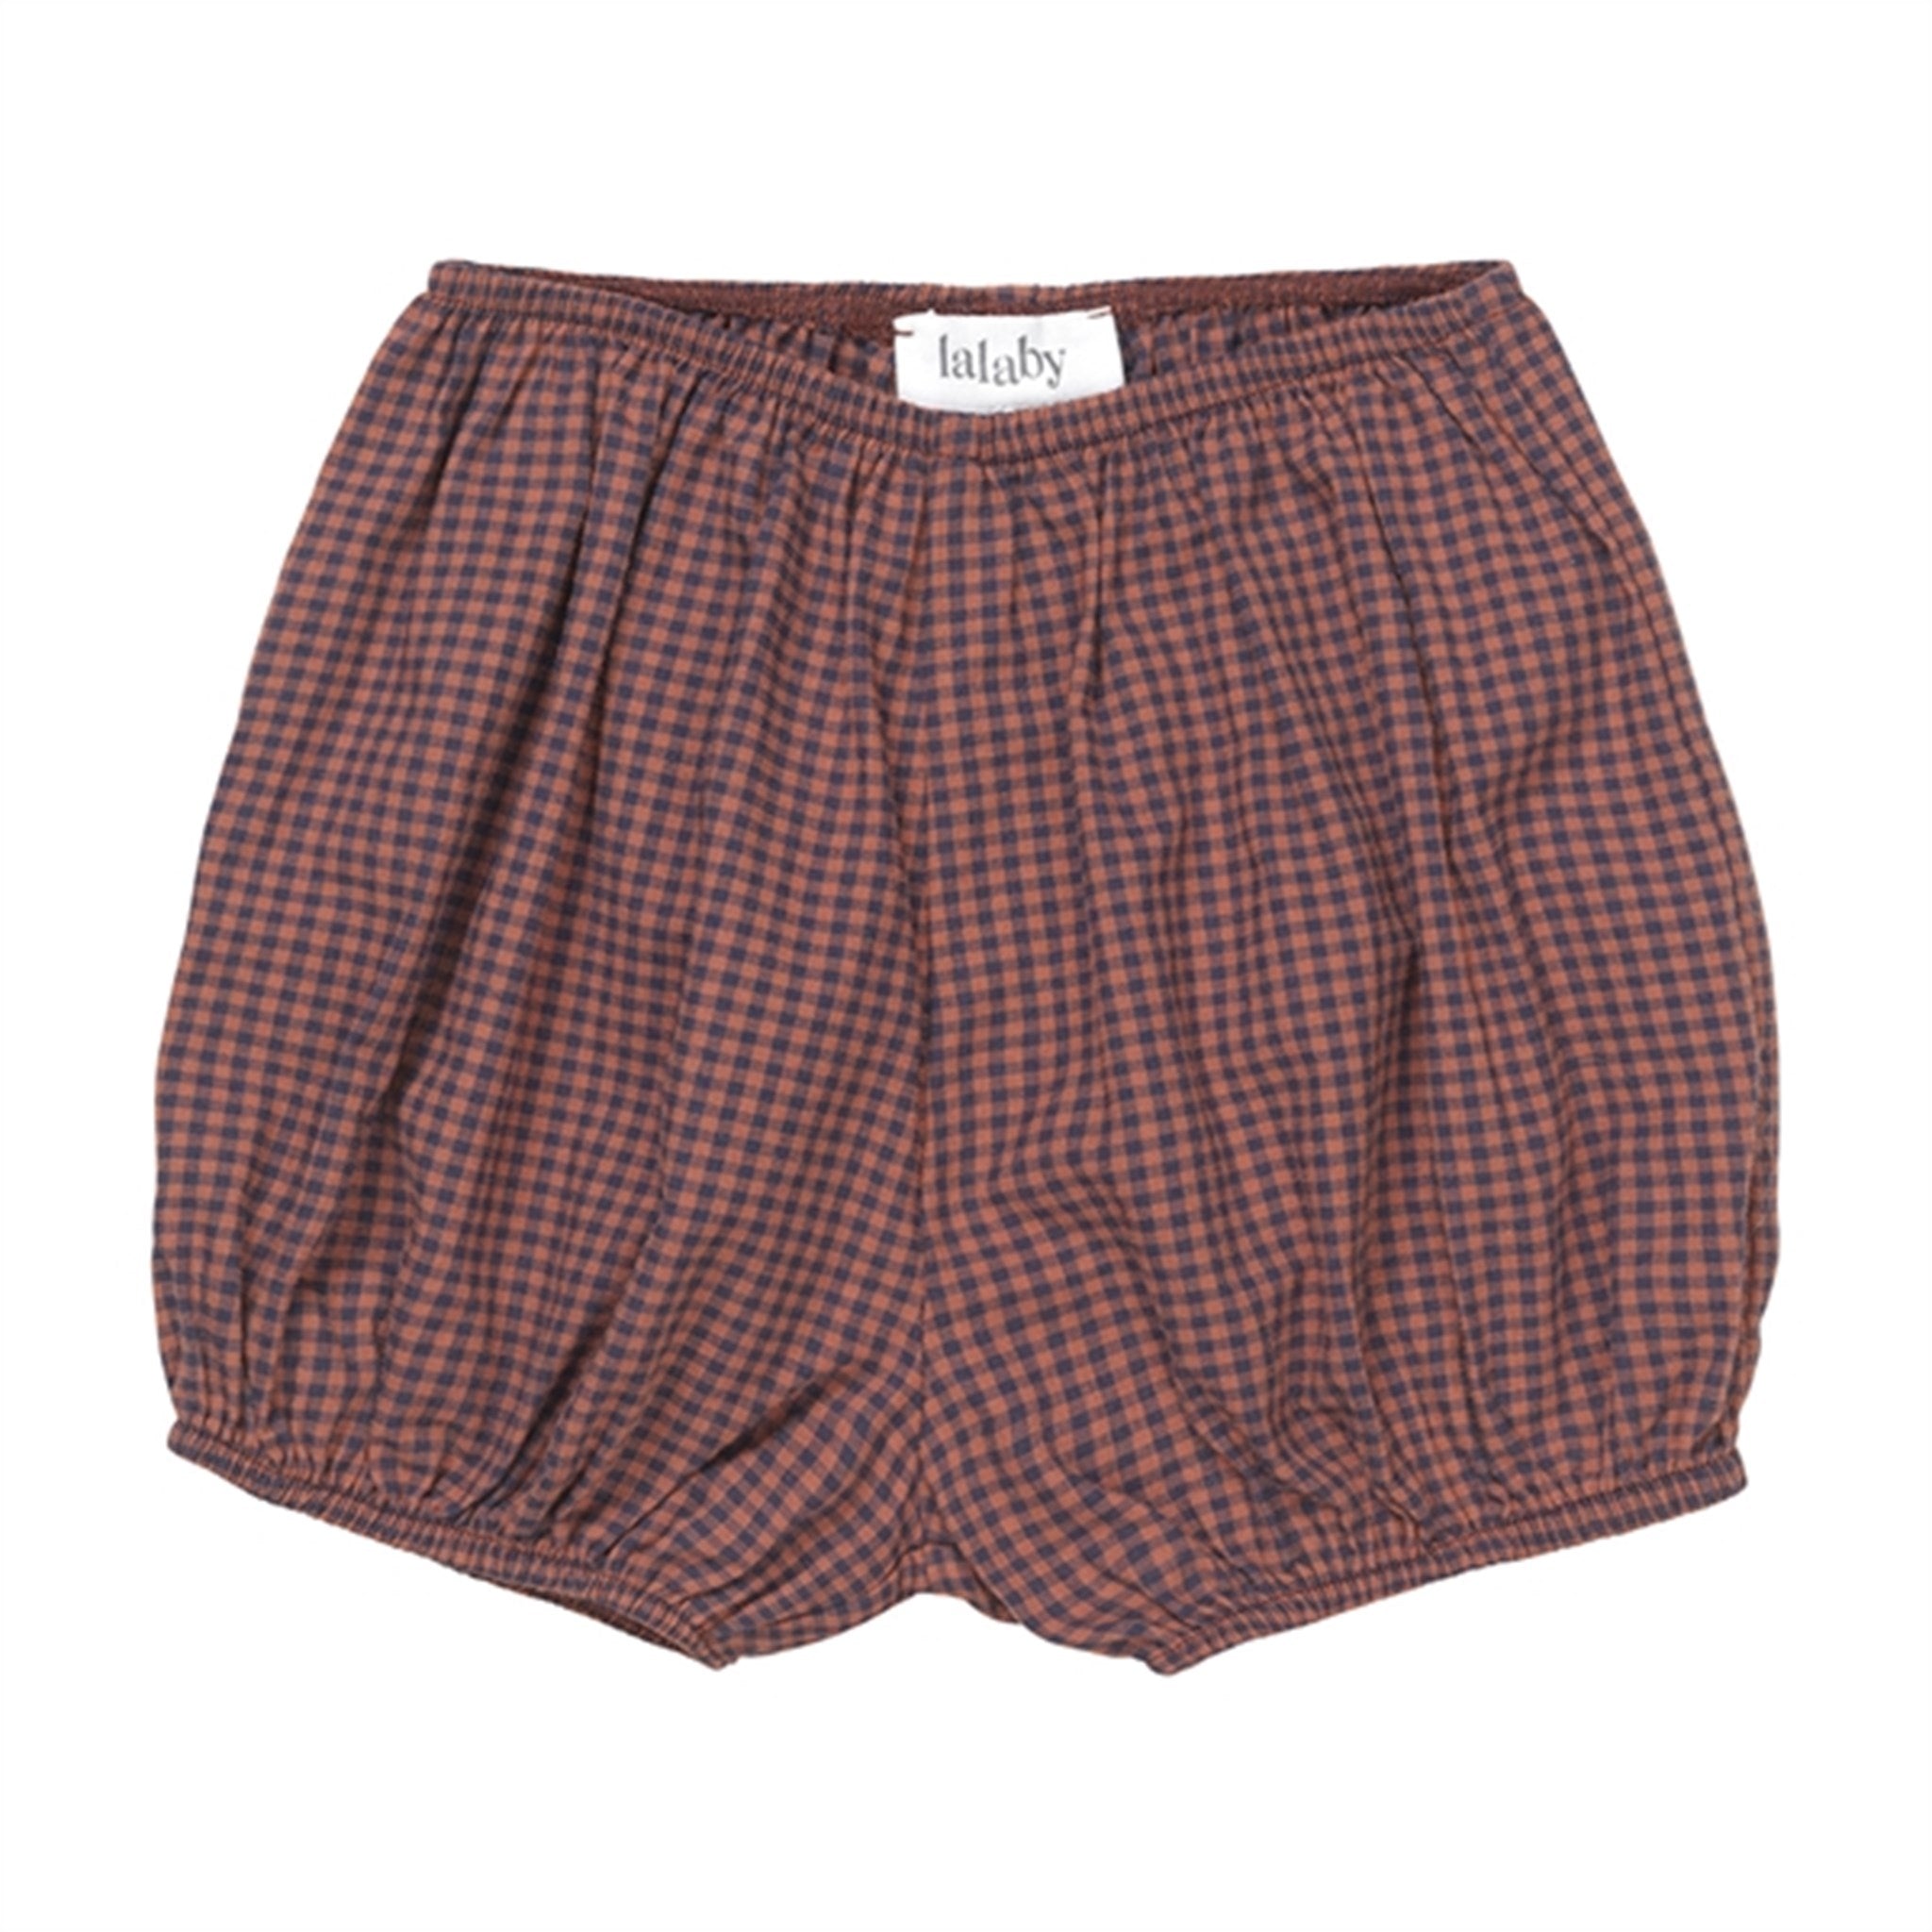 lalaby Indigo Check Nelly Bloomers